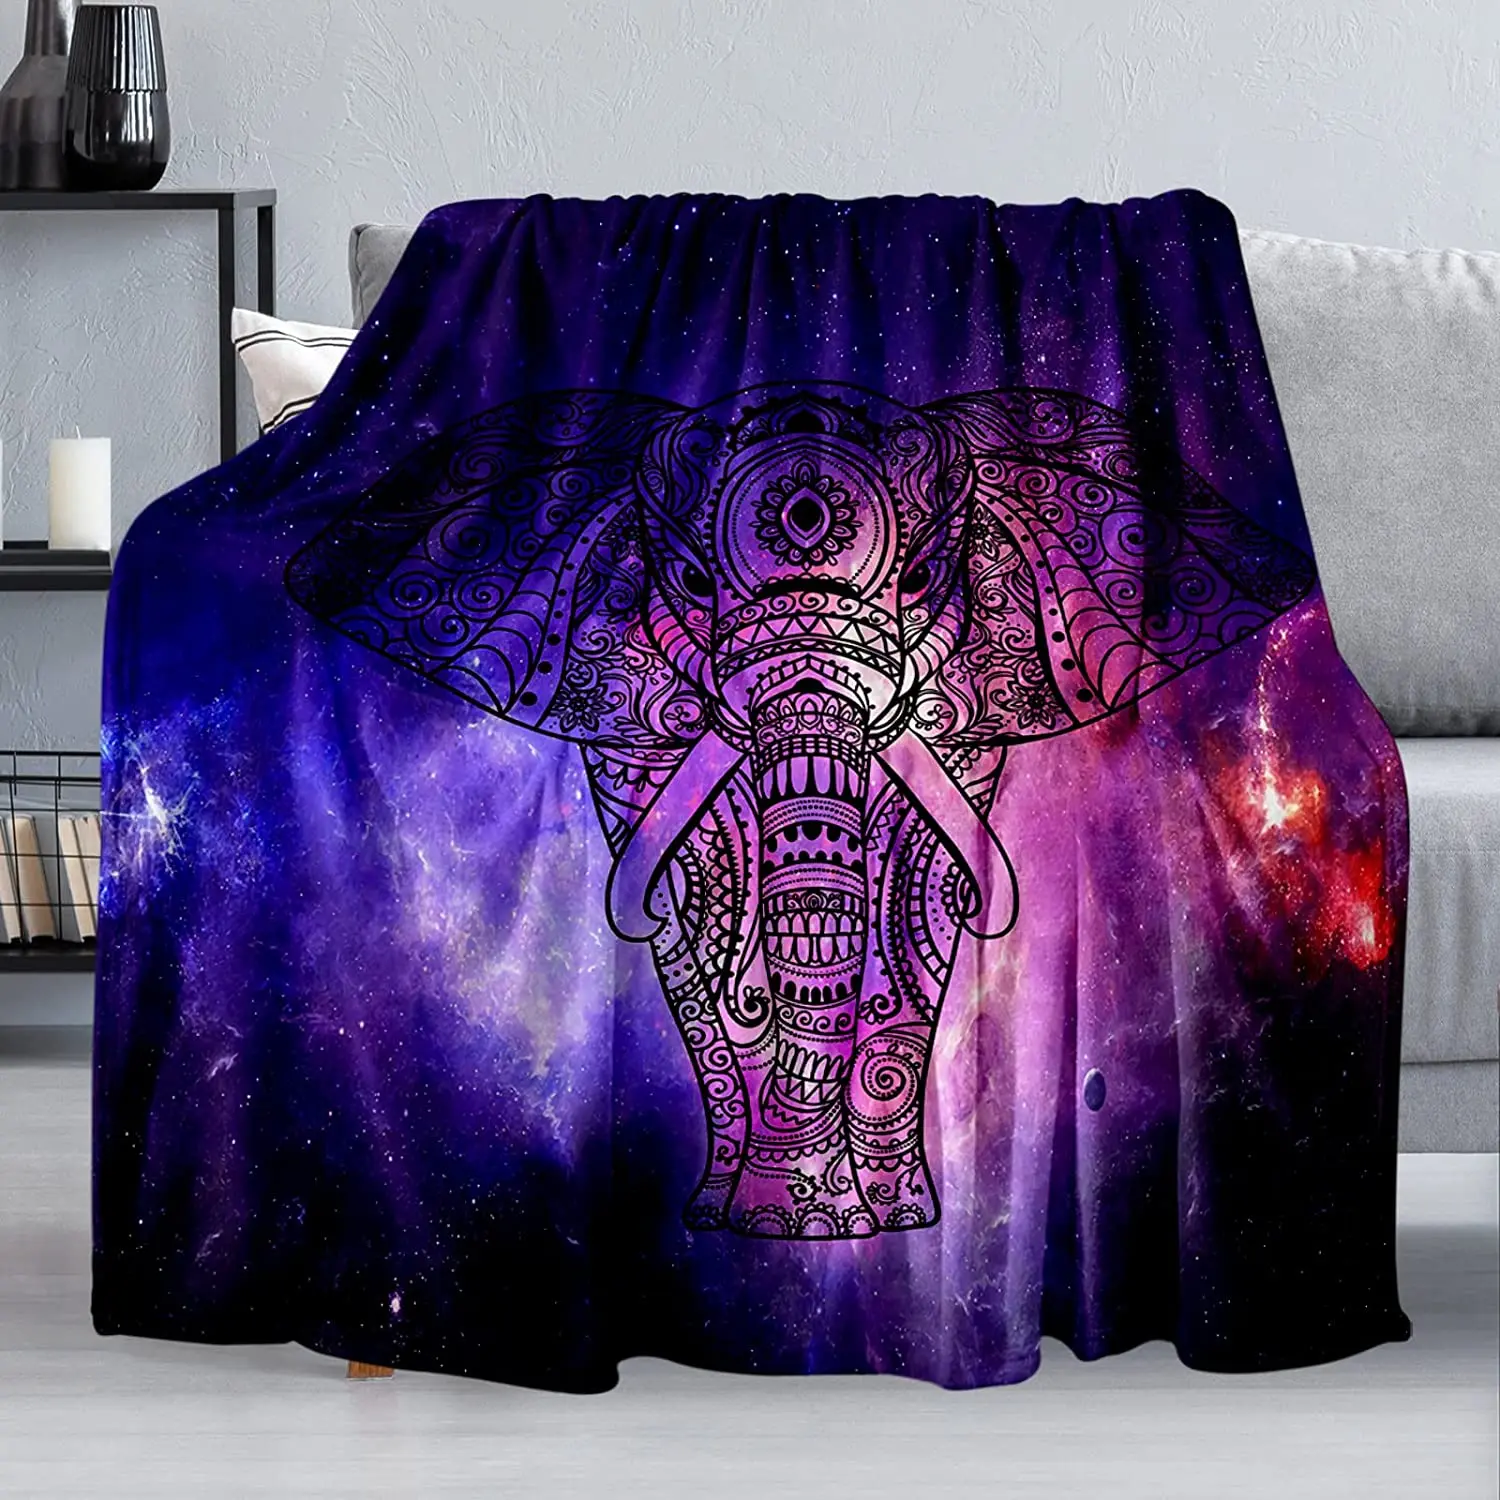 

Blanket Bohemian Style Mandala Pattern for Bed Couch Sofa Decor Friend Gifts Lightweight Super Soft Warm Elephant Flannel Throw